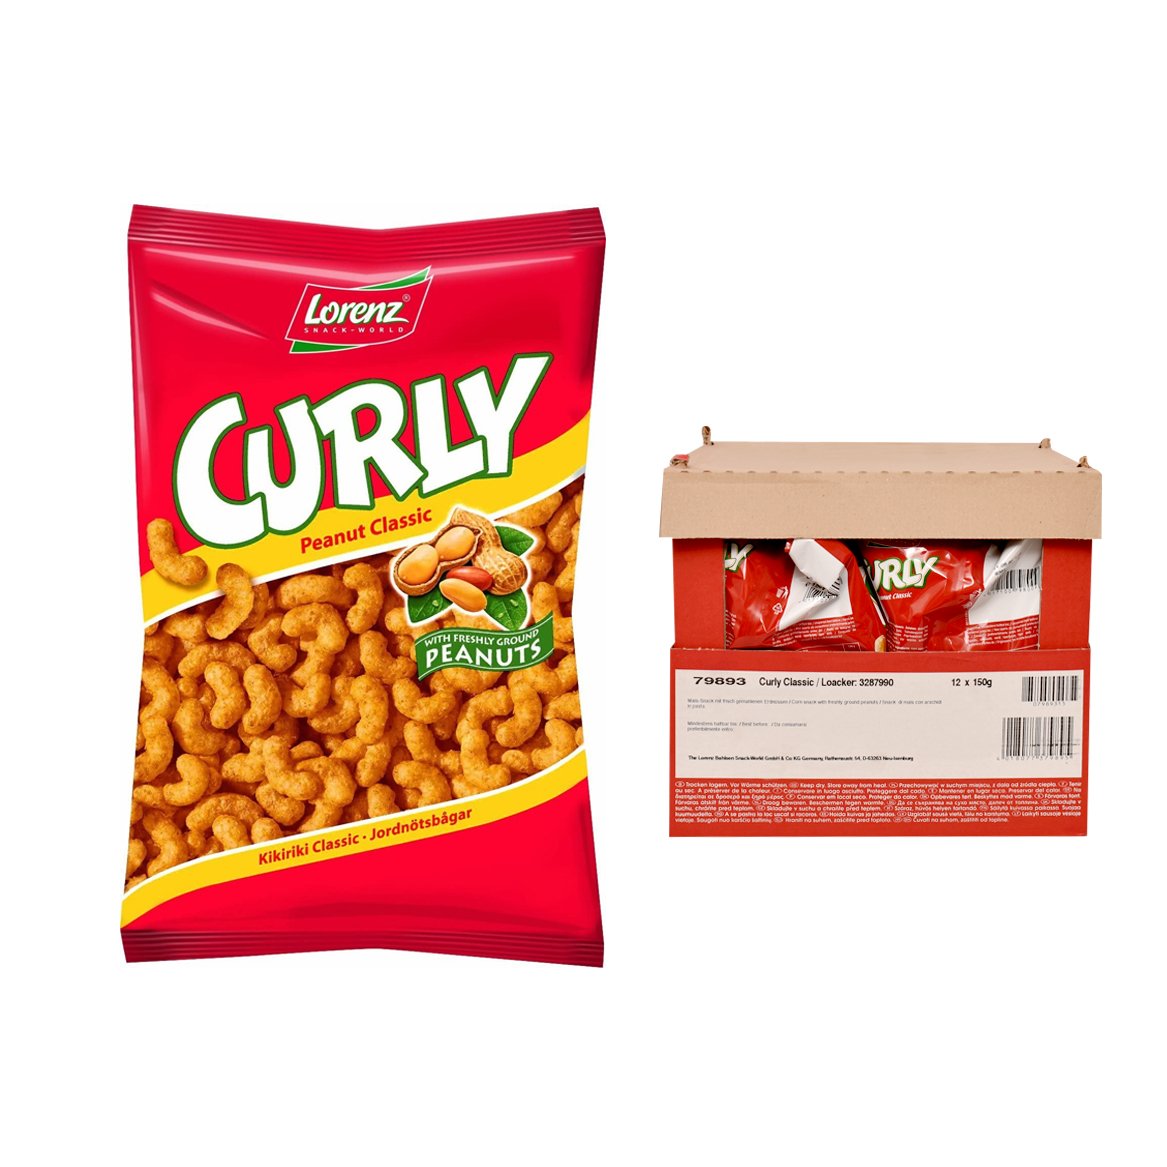 Lorenz Curly Classic Peanuts - 120g - Pack of 14